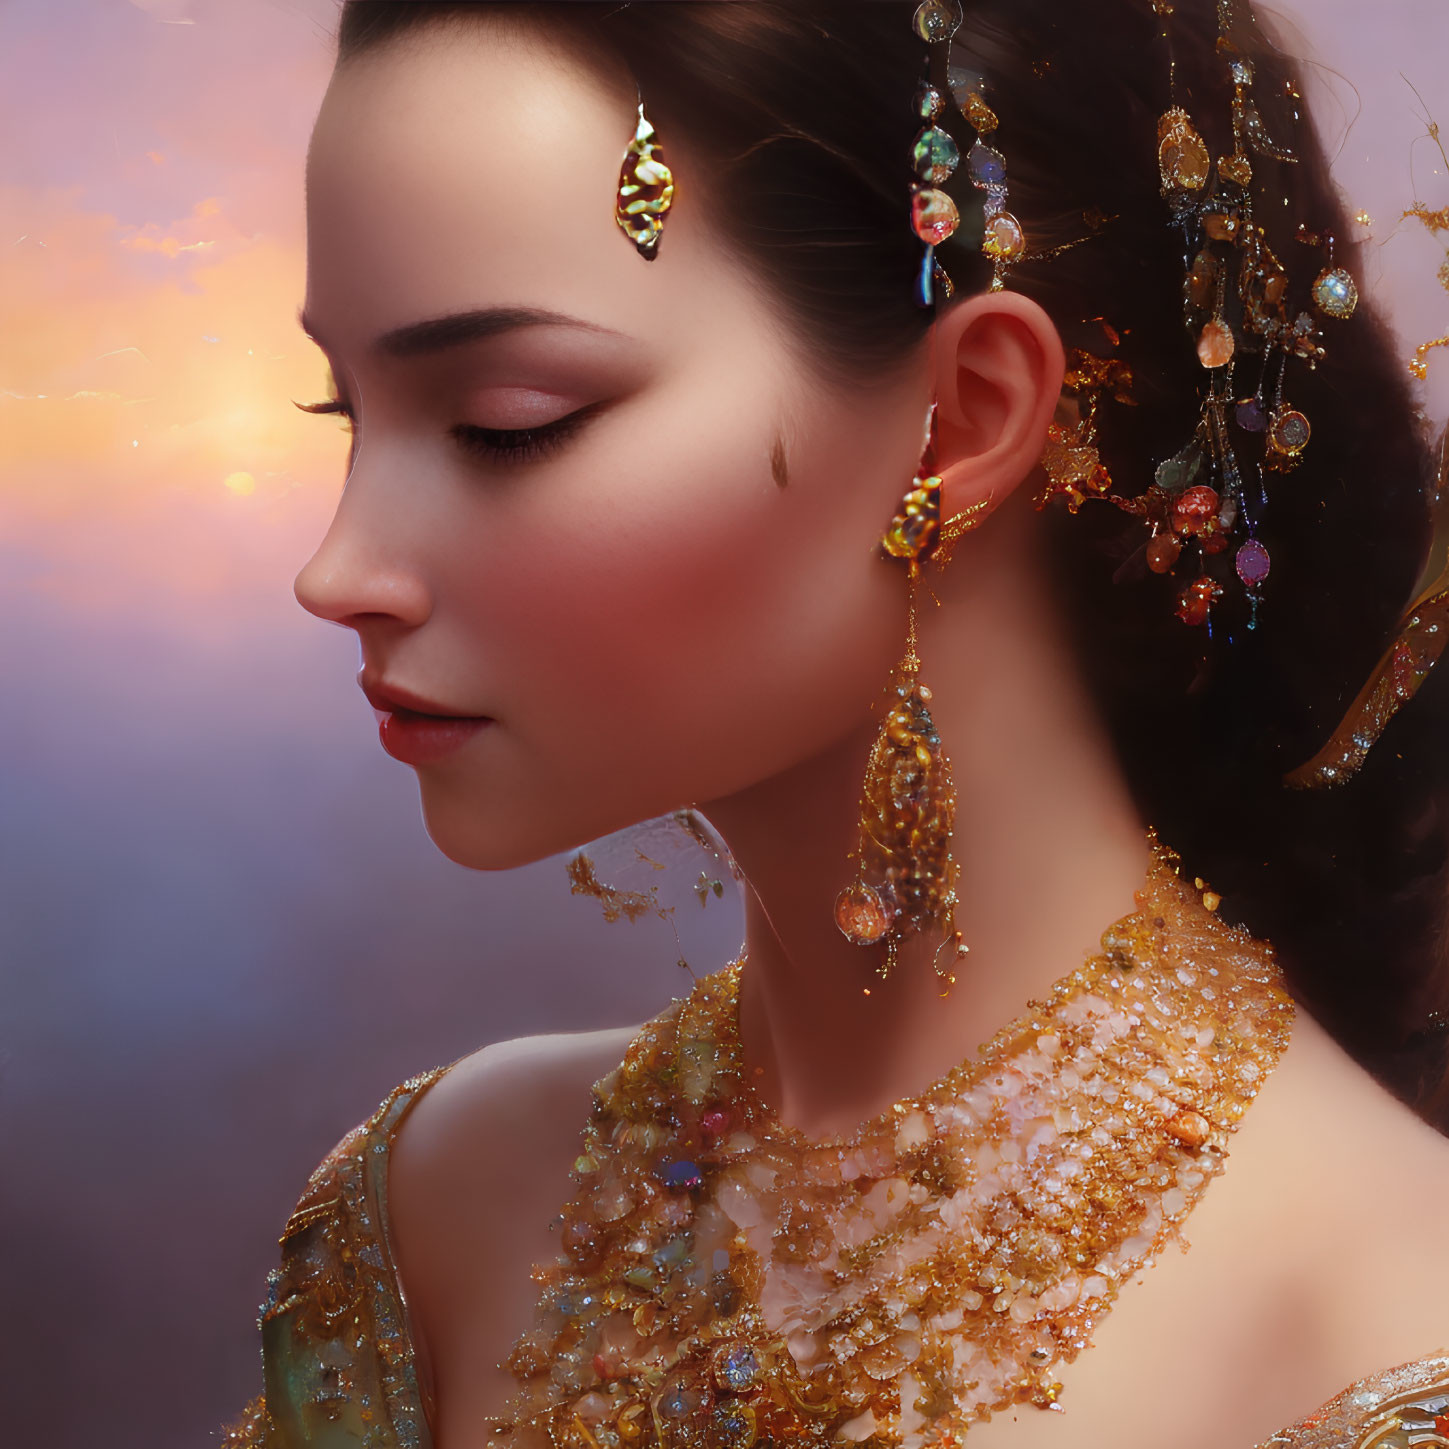 Woman adorned with ornate gold jewelry against warm, sunset-like backdrop